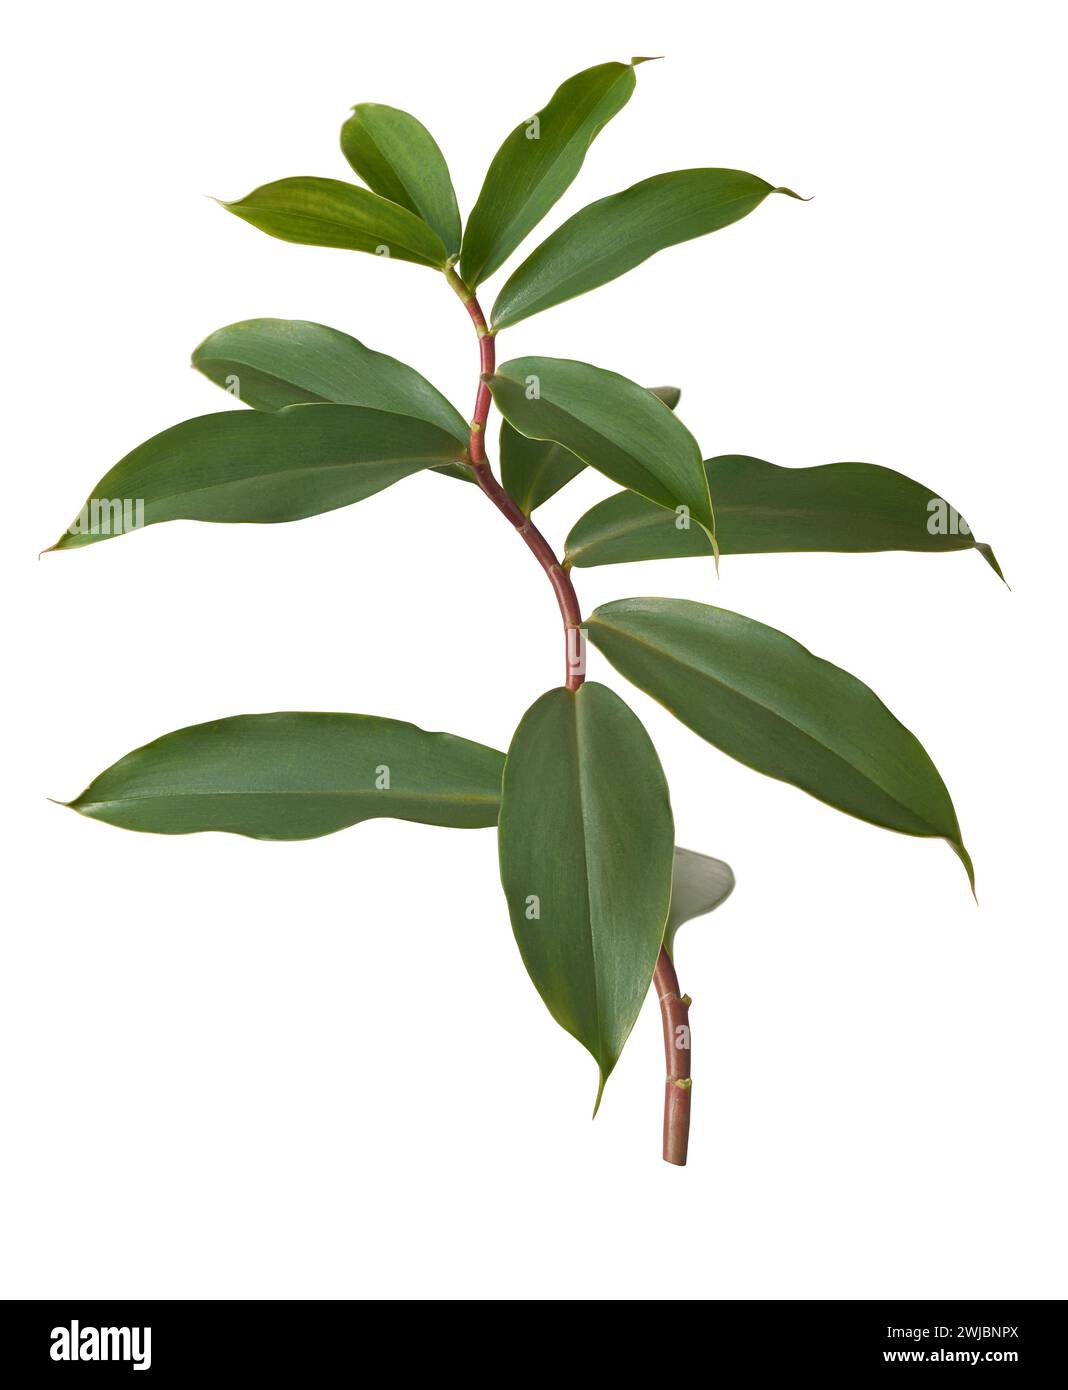 thebu plant foliage, costus speciosus, commonly found in sri lanka and widely used in ayurveda medicine, leaves are beneficial for control blood sugar Stock Photo